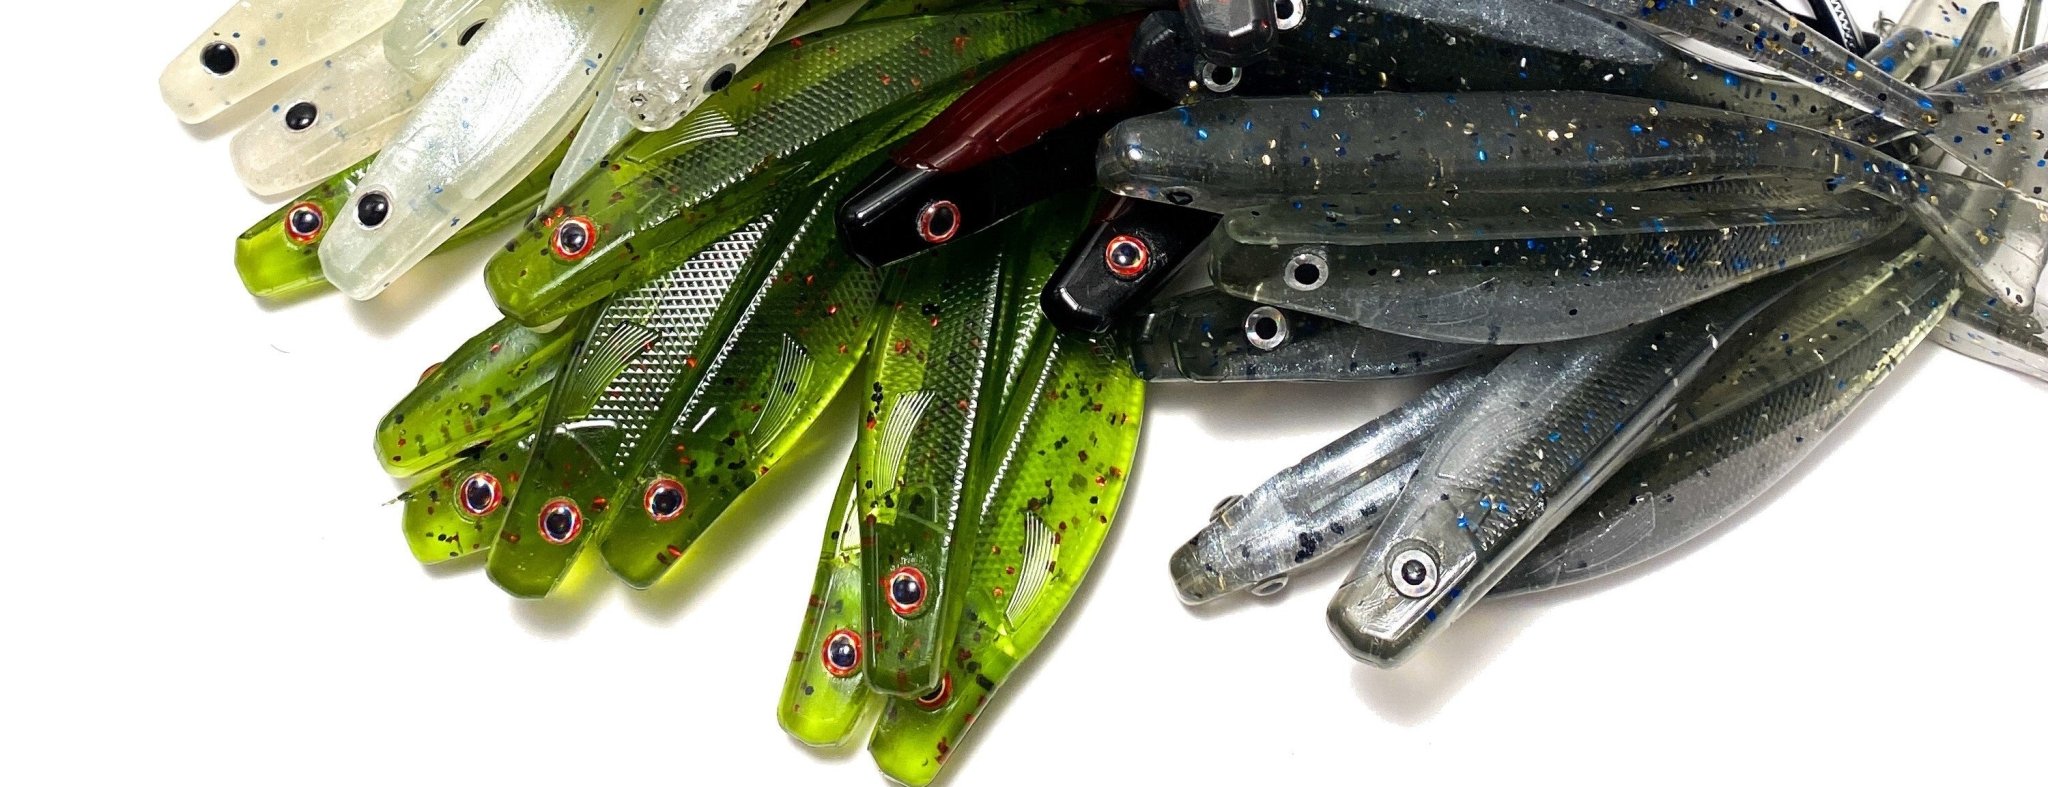 Soft Plastic Jerkbait (fluke) Tips and Tricks you Need to Know in